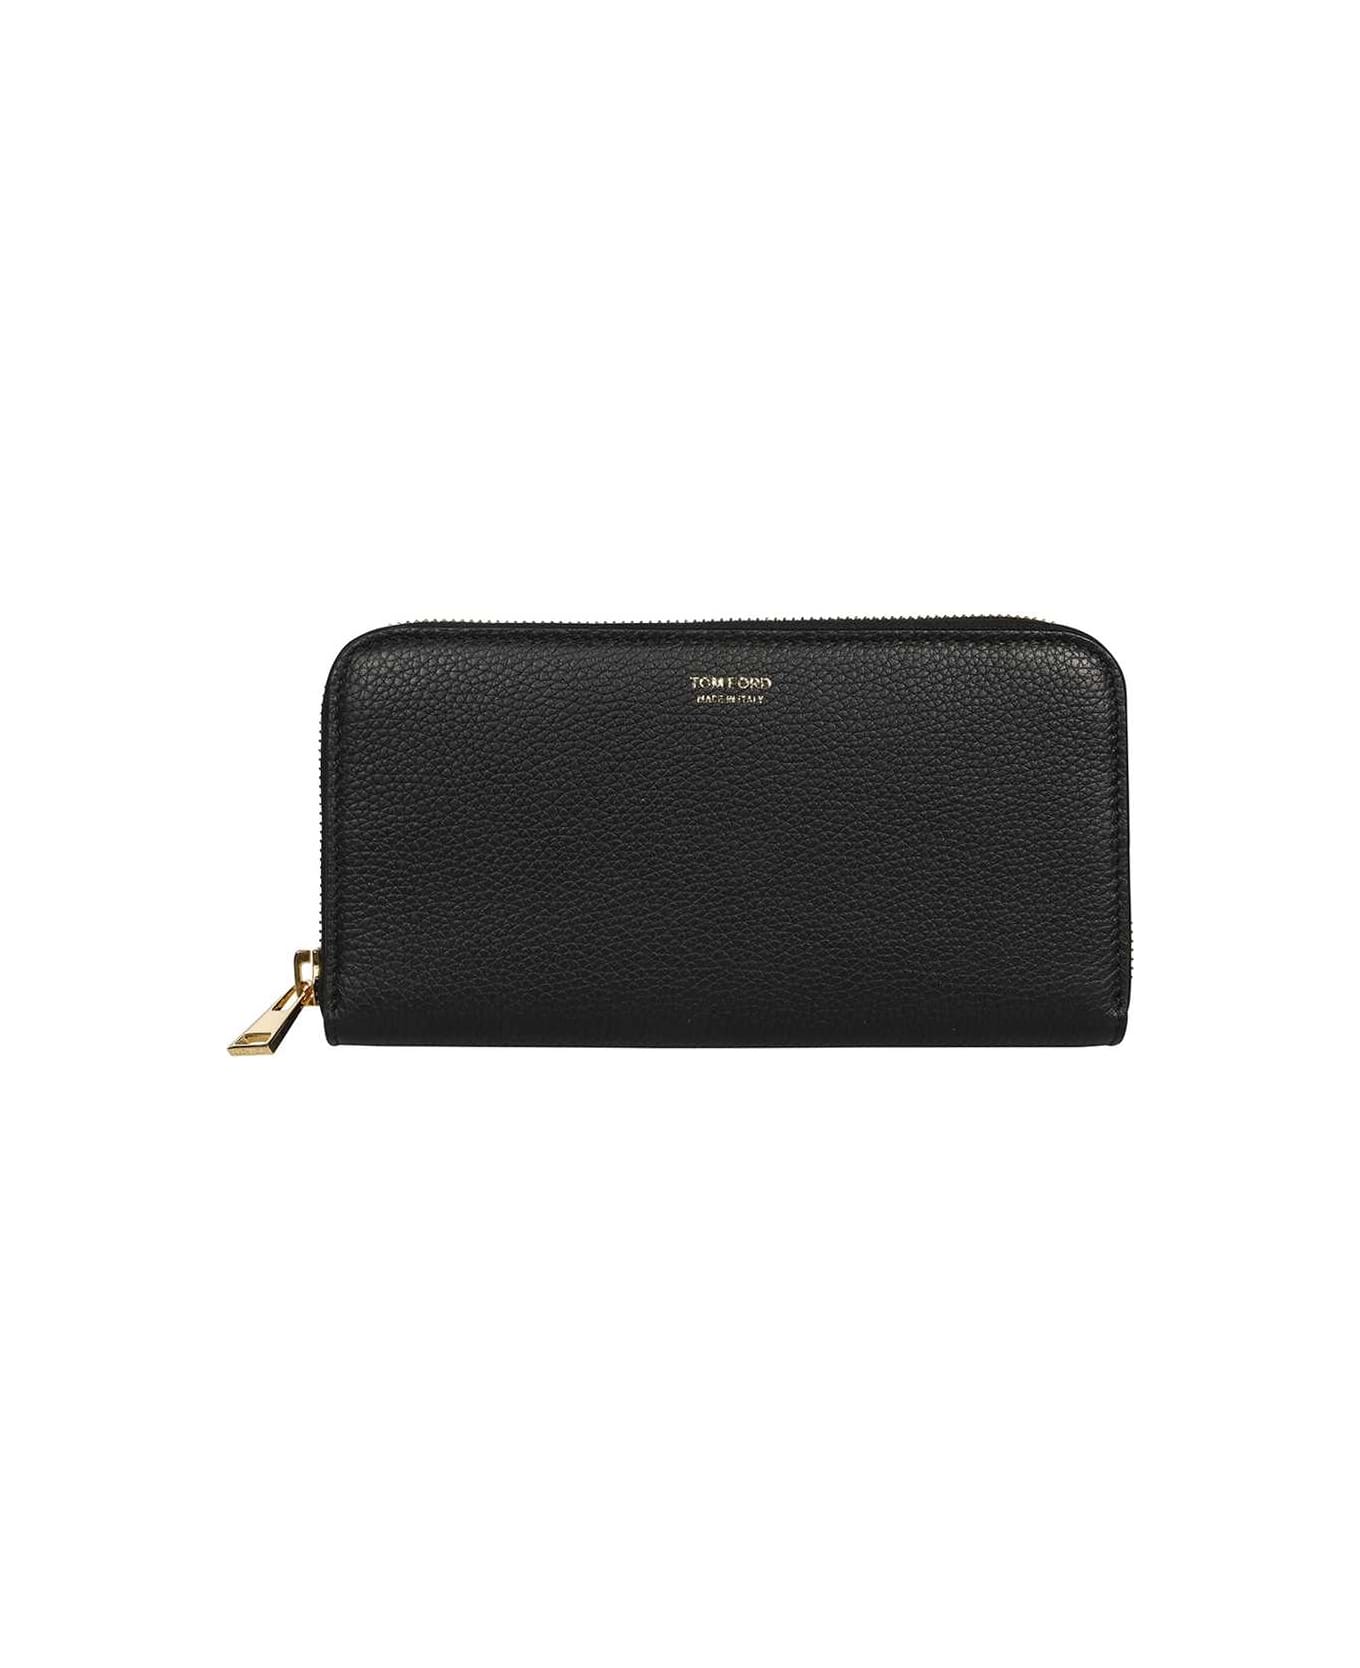 Tom Ford Leather Ziparound Wallet - black